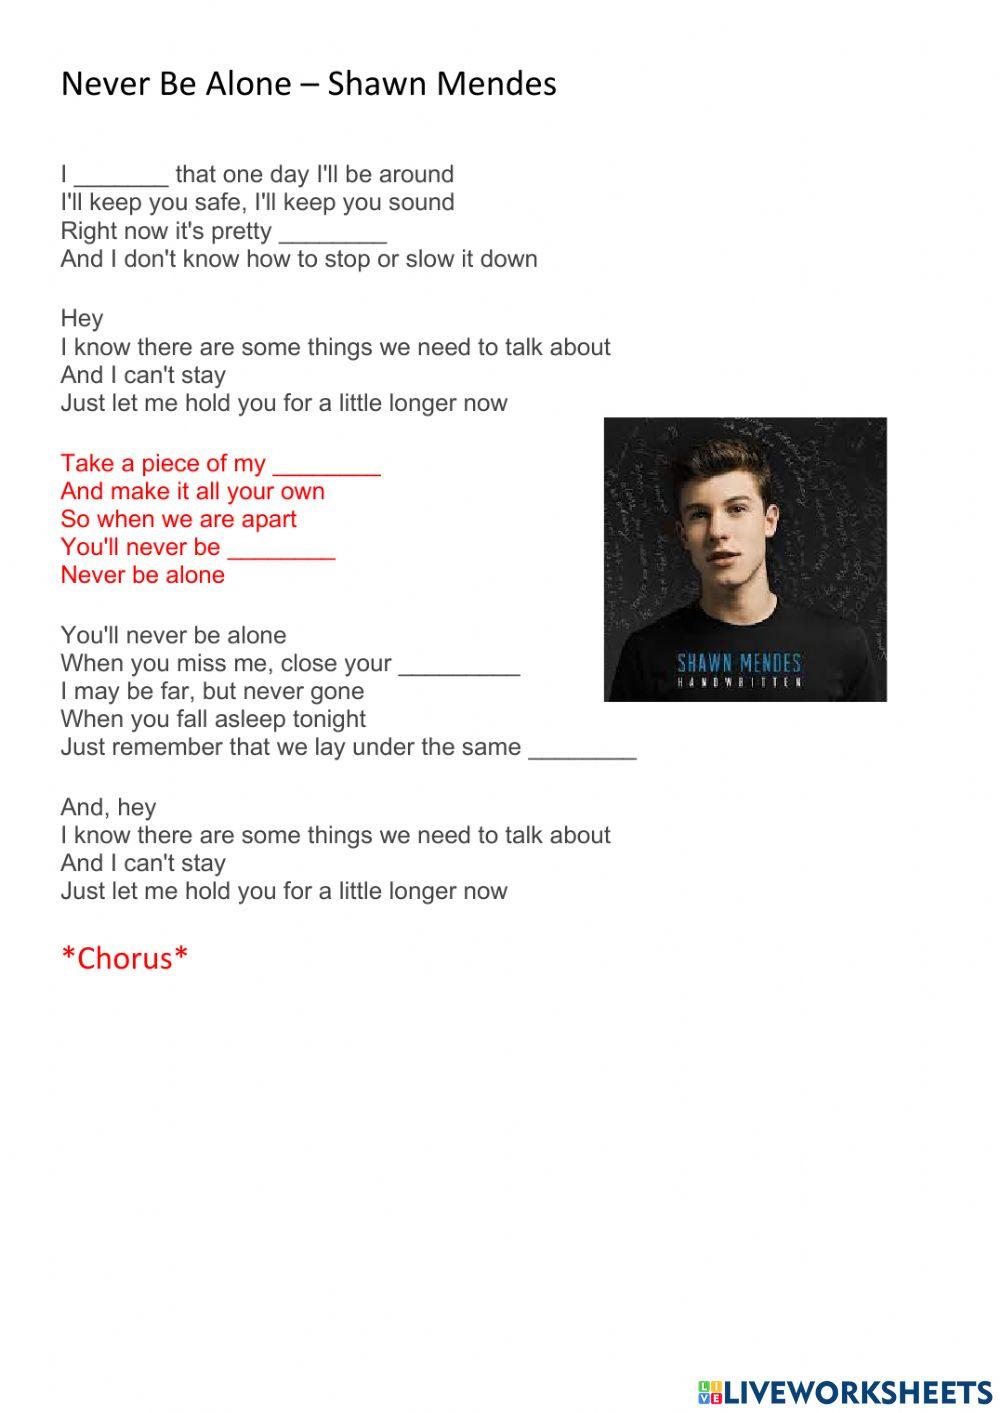 Never Be Alone, Shawn Mendes